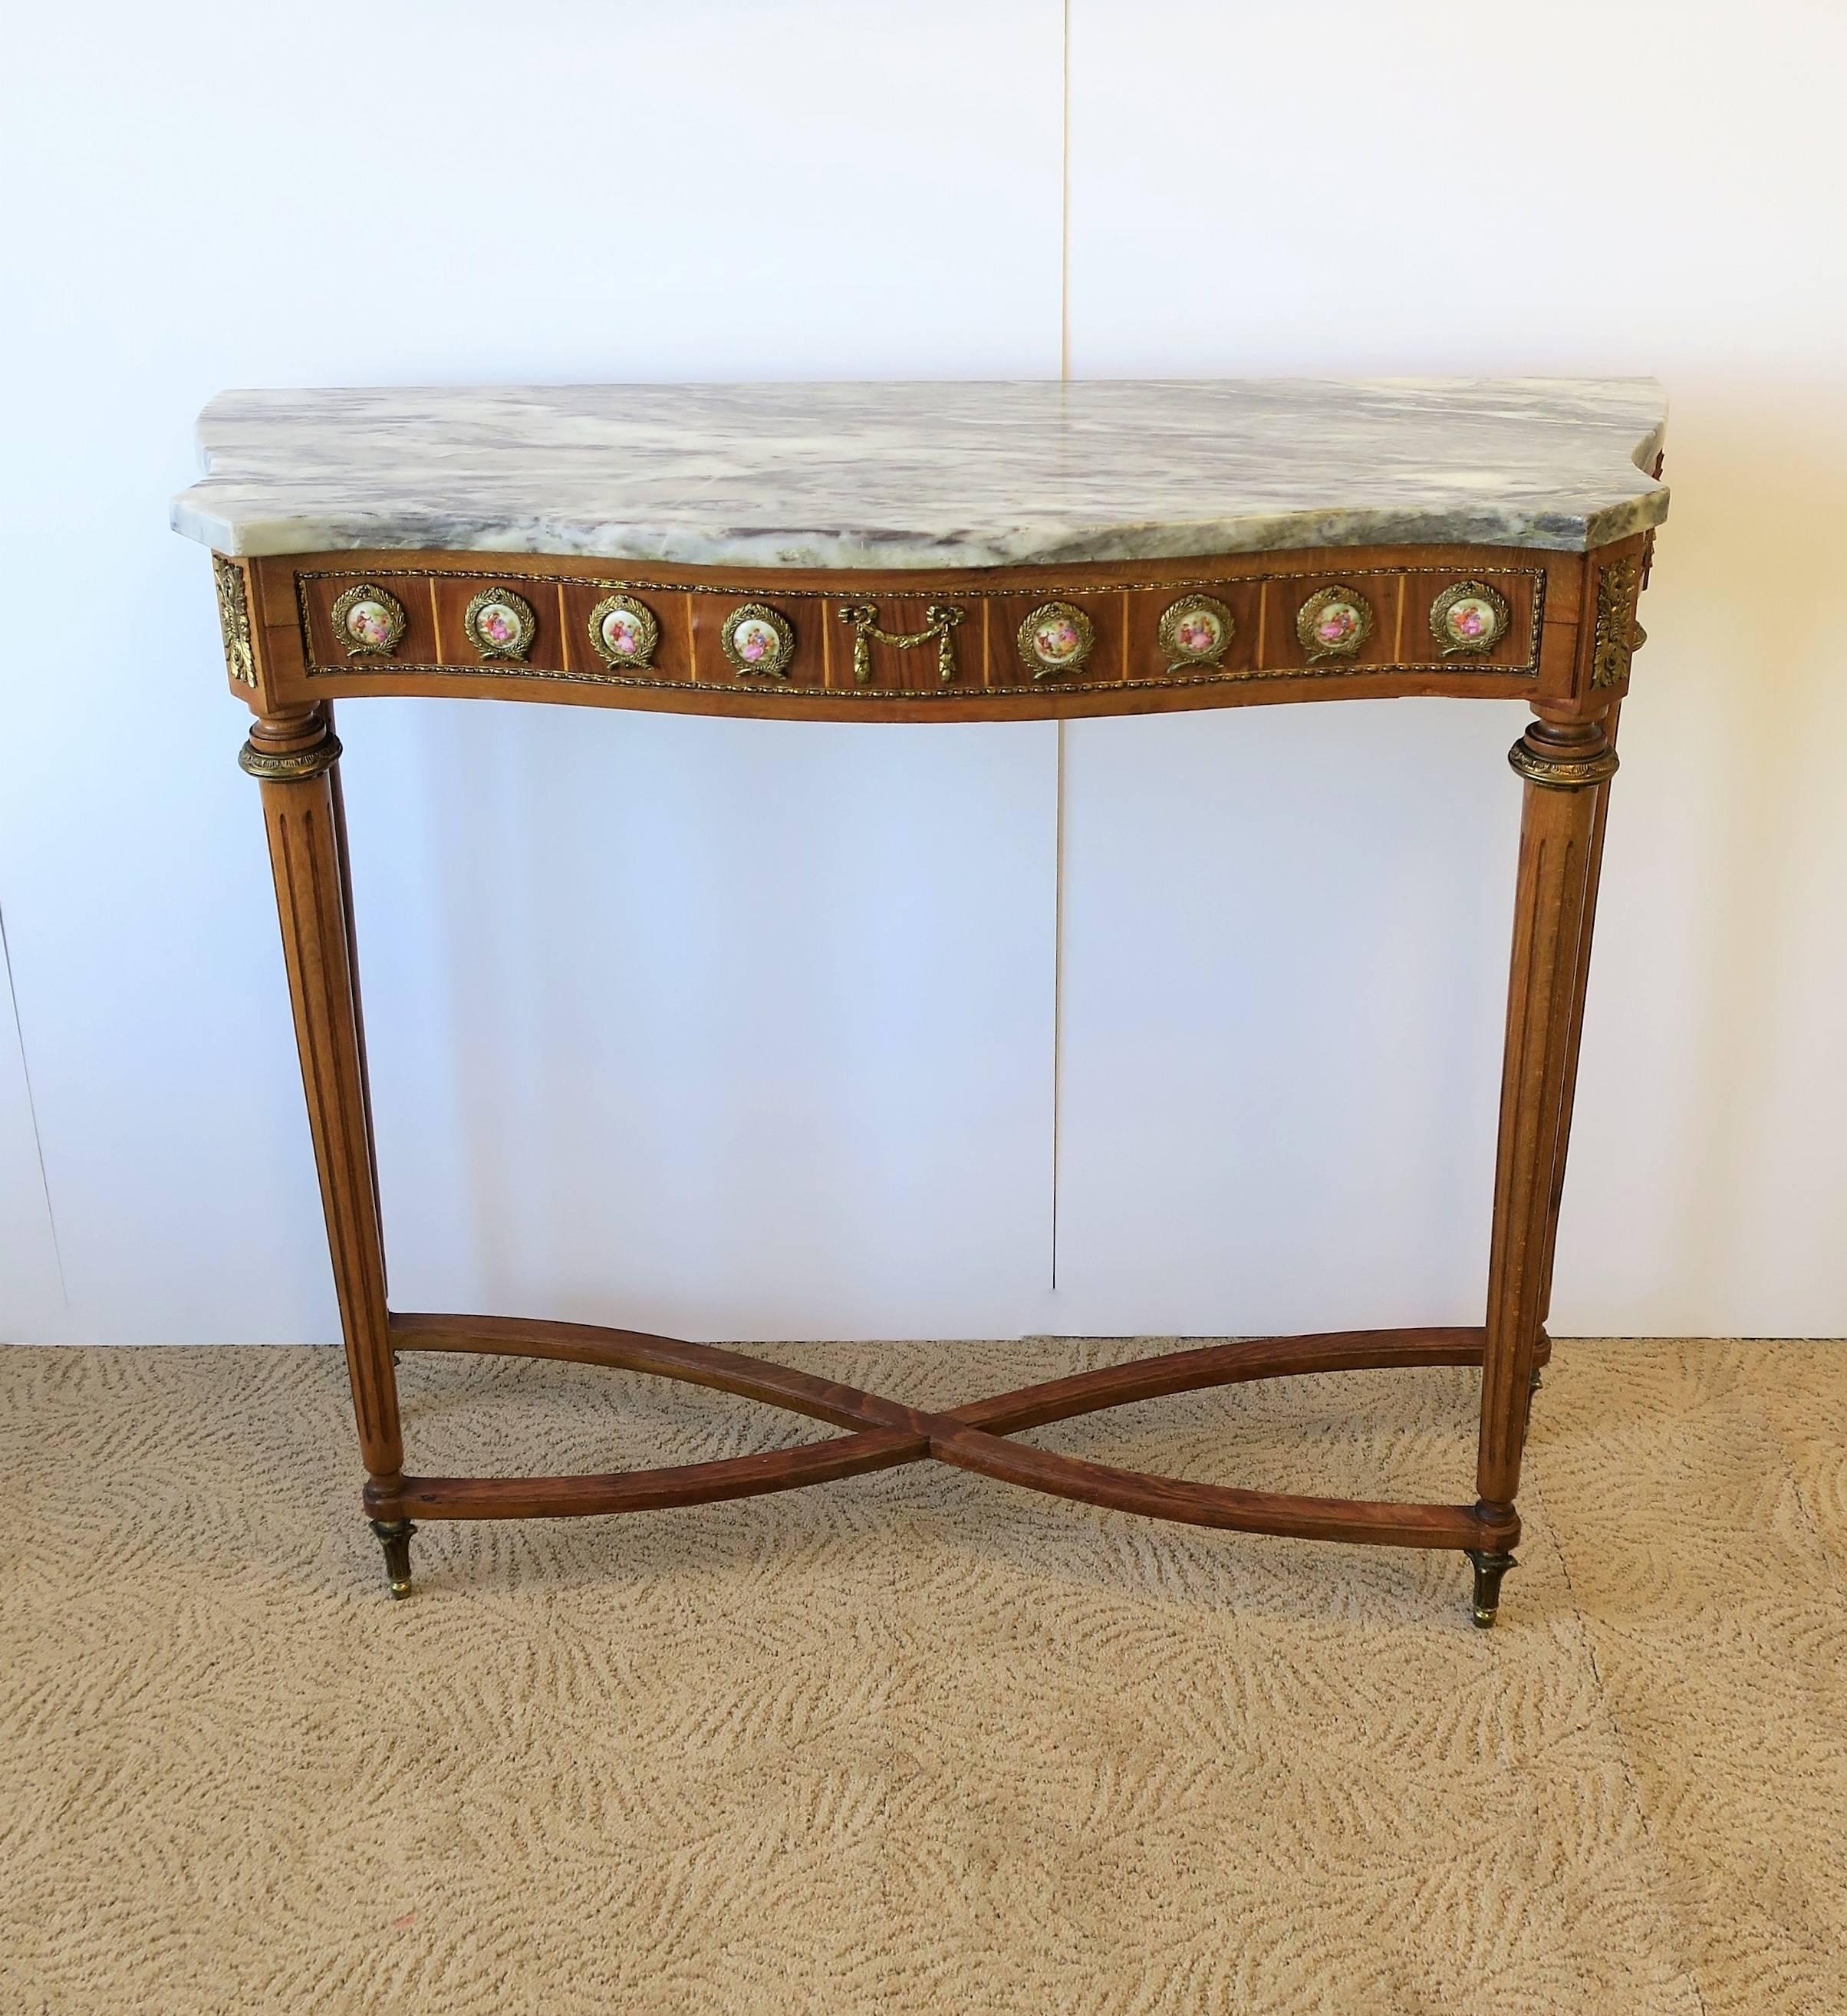 A console table with grey/dark grey/white marble top, wood base, and porcelain and brass ormolu mounts, in the Regency style, circa mid-20th century, 1960s. Details include substantial marble top, shape of marble top, brass and porcelain mounts with